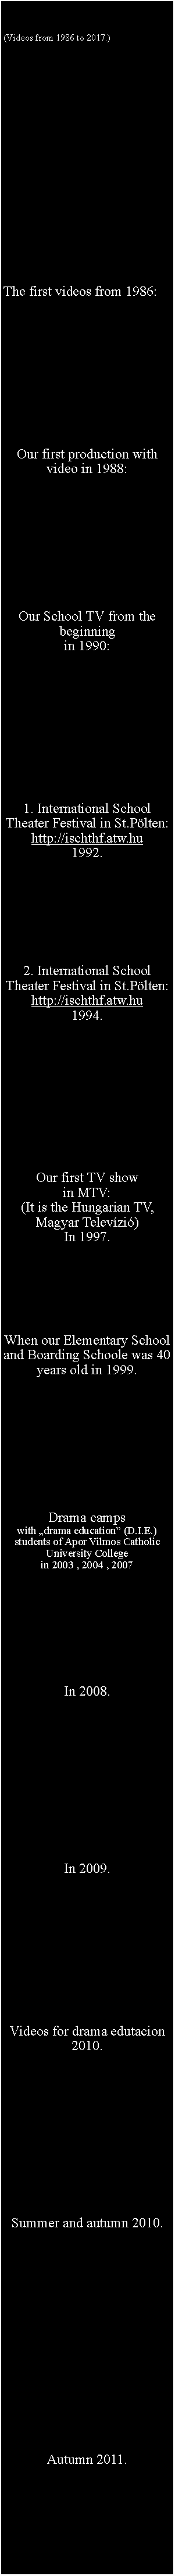 Szvegdoboz: (Videos from 1986 to 2017.) The first videos from 1986:Our first production with video in 1988: Our School TV from the beginningin 1990:  1. International School Theater Festival in St.Plten:http://ischthf.atw.hu1992.  2. International School Theater Festival in St.Plten:http://ischthf.atw.hu1994. Our first TV showin MTV:(It is the Hungarian TV,Magyar Televzi)In 1997.When our Elementary School and Boarding Schoole was 40 years old in 1999. Drama camps with drama education (D.I.E.) students of Apor Vilmos Catholic University Collegein 2003 , 2004 , 2007  In 2008.In 2009.Videos for drama edutacion2010.Summer and autumn 2010.Autumn 2011.